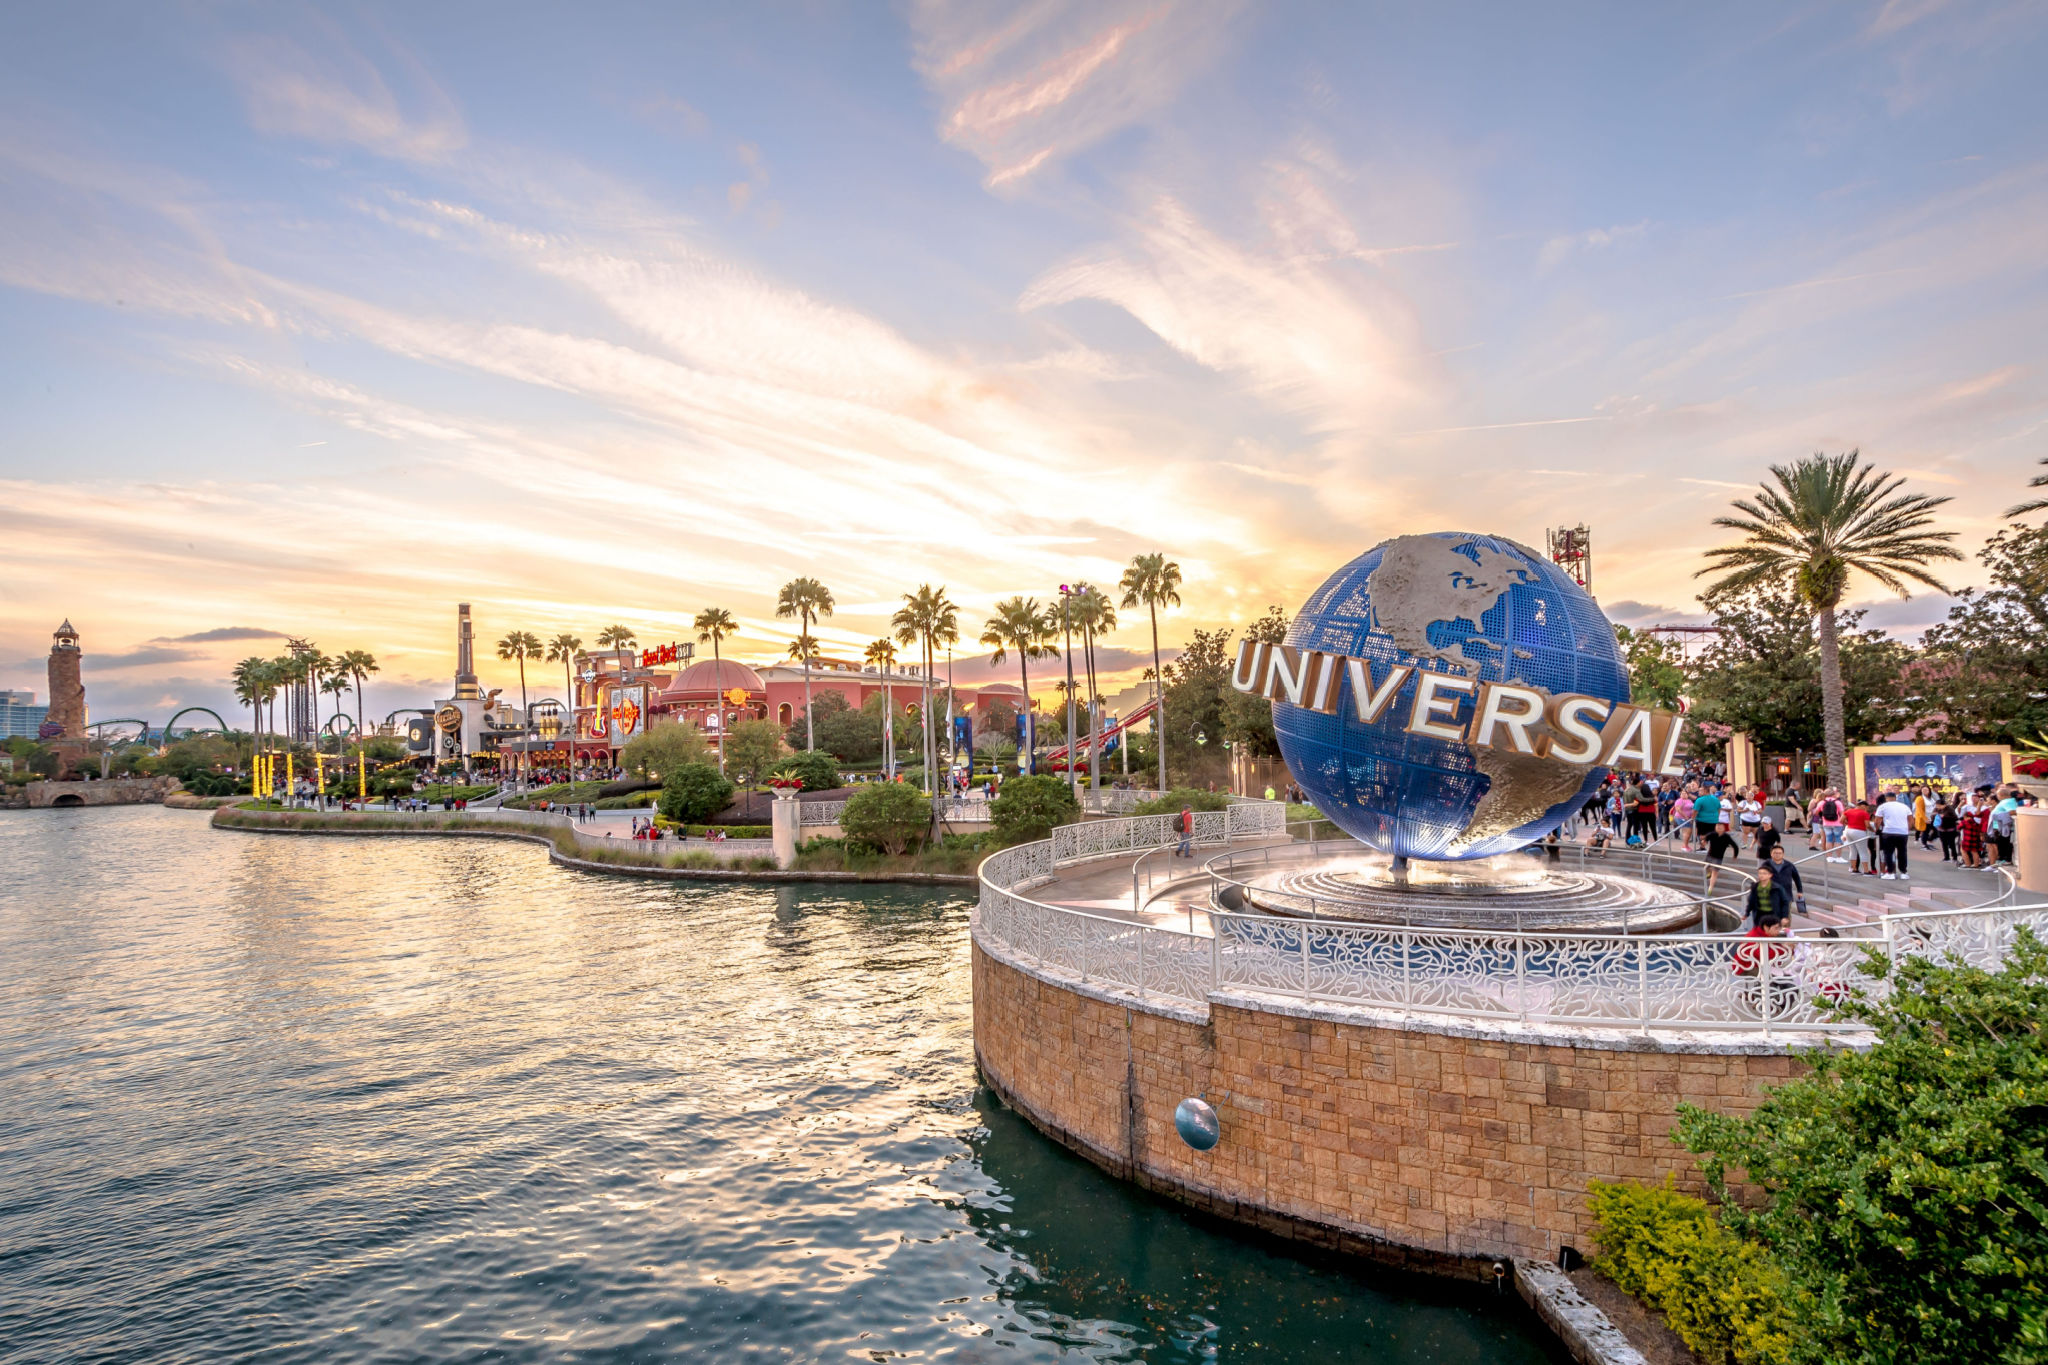 10 Things you MUST do at Universal Orlando! Learn about rides and attractions you can't miss! What's new and coming soon at the Wizarding World of Harry Potter and more with family vacation and travel tips. LivingLocurto.com